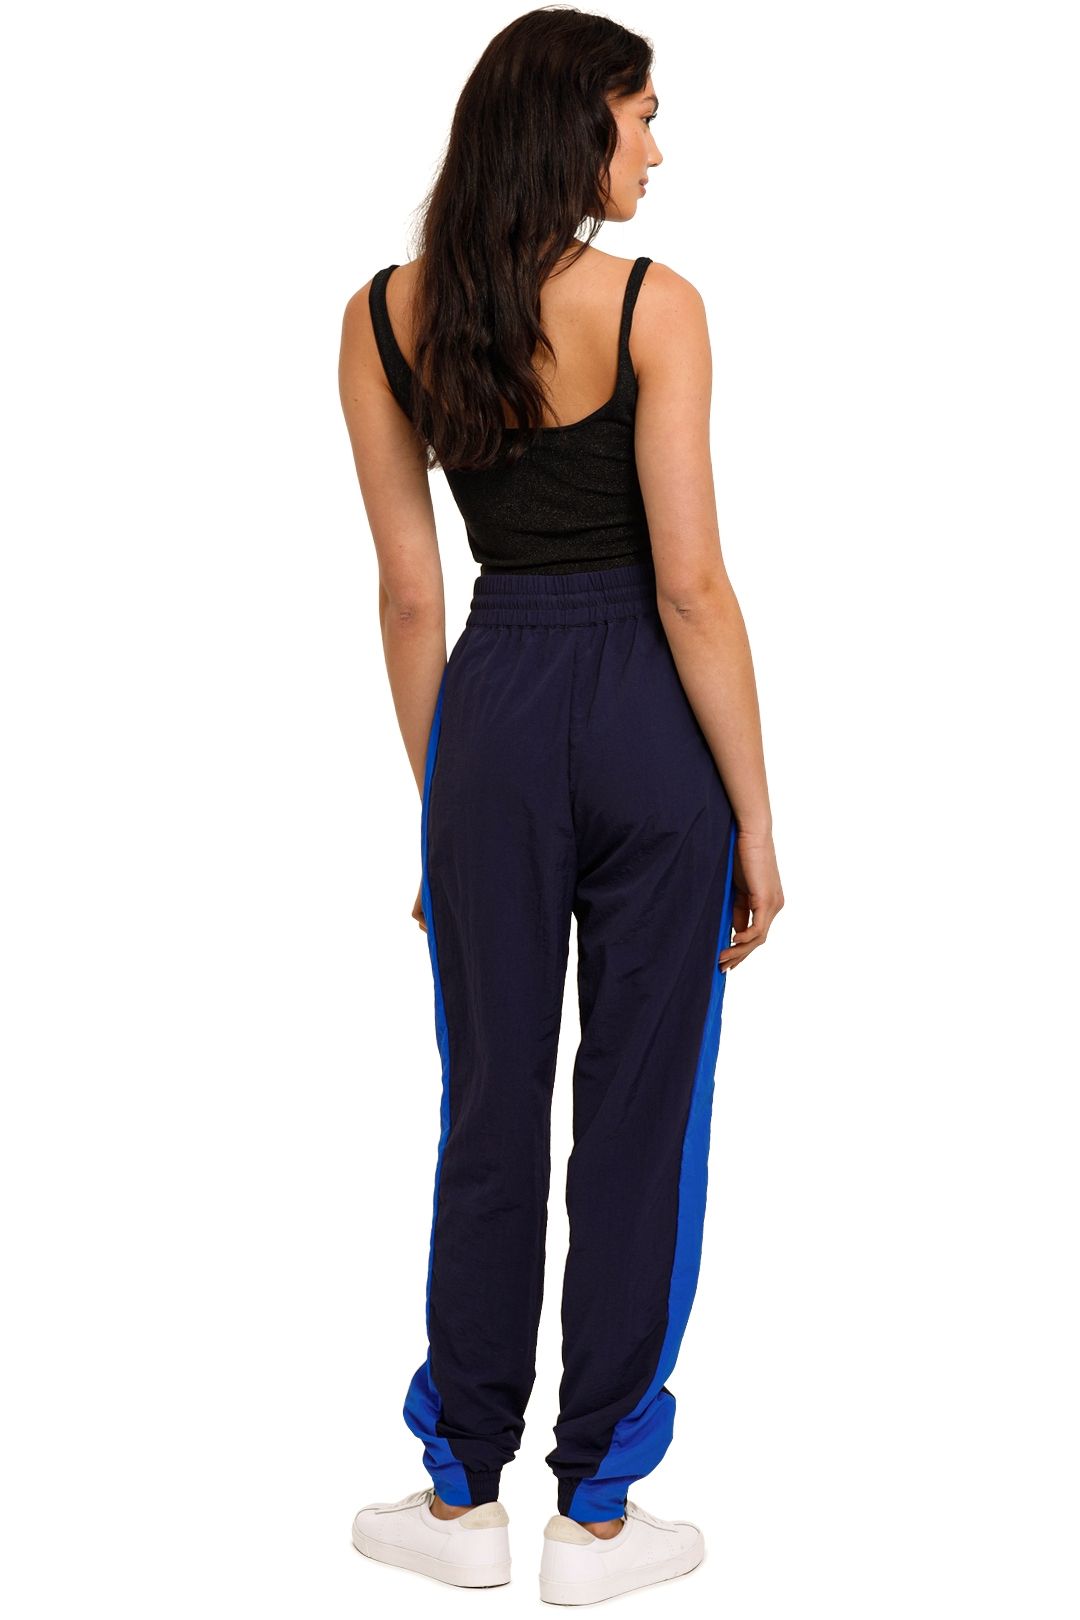 C&M Camilla And Marc Jukes Track Pant